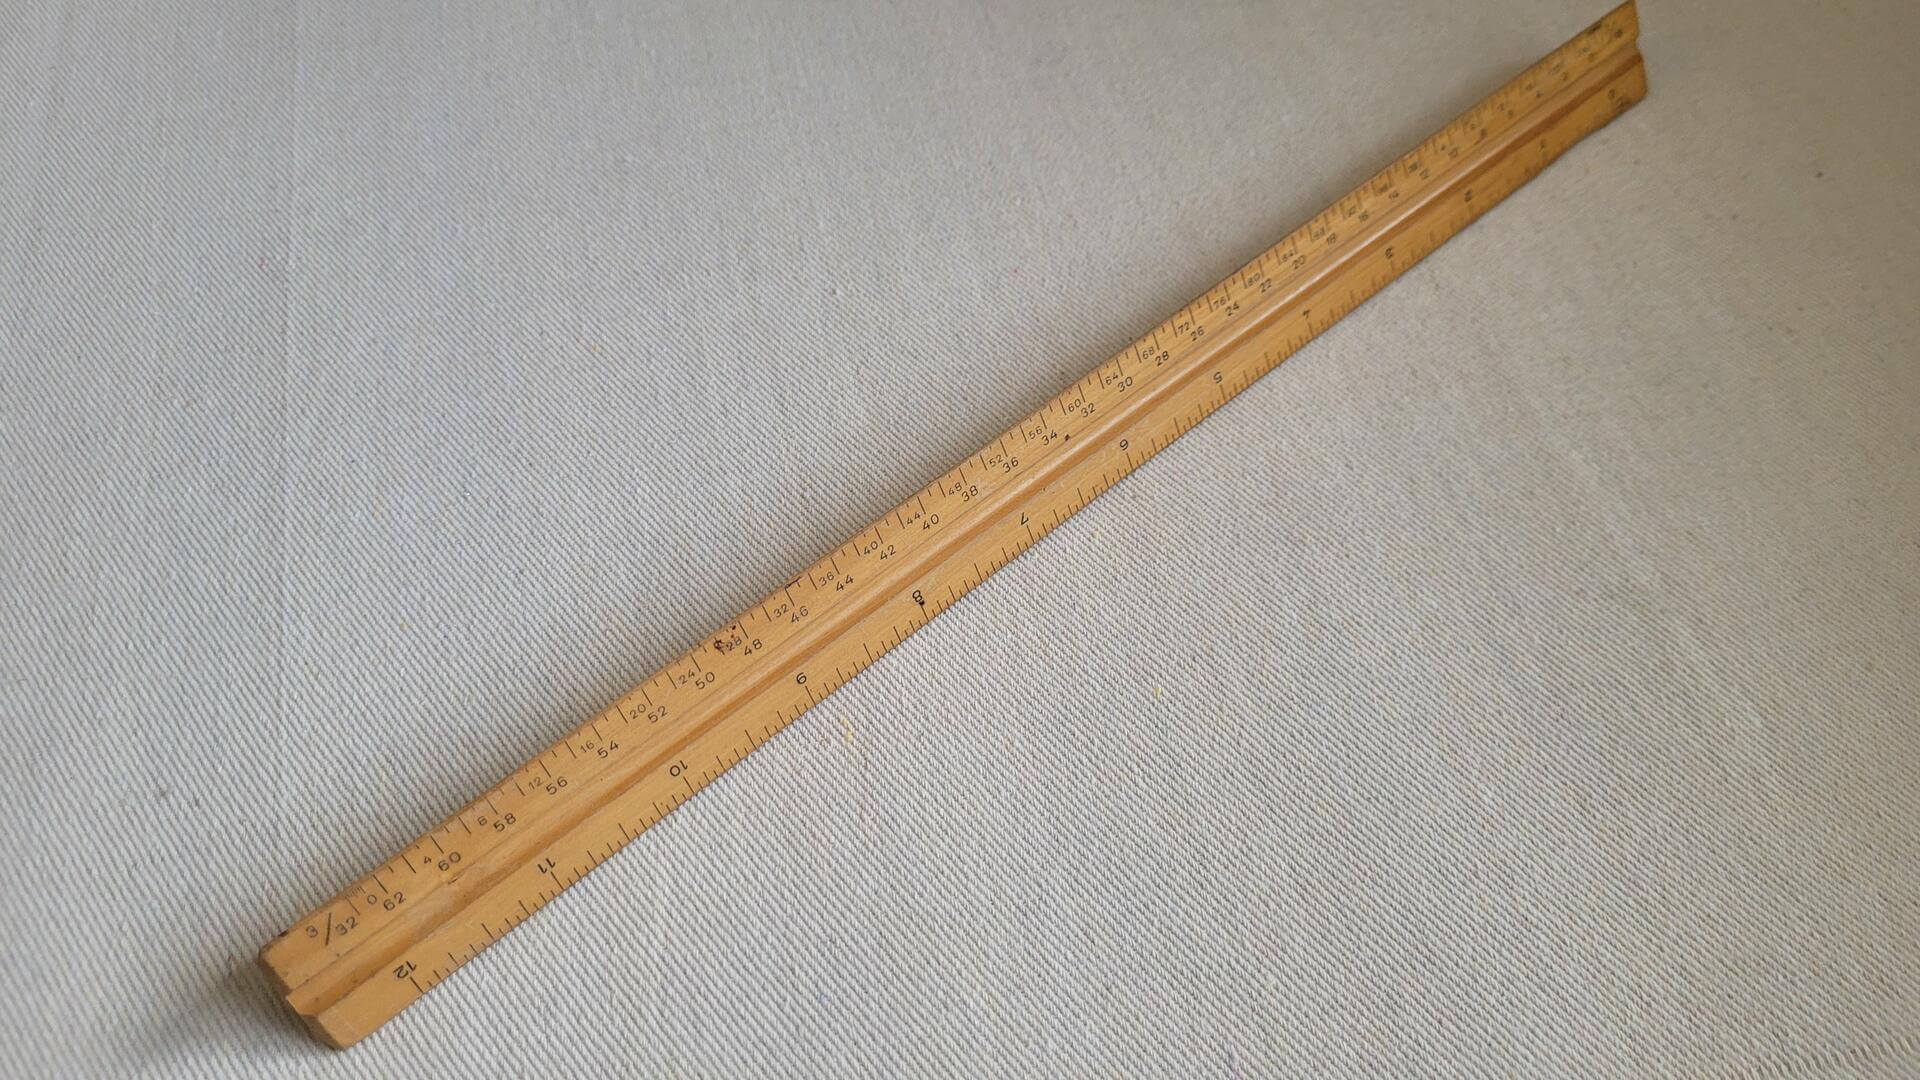 Vintage Alpha 2810 genuine boxwood wooden triangular drafting and architect ruler. Made in West Germany collectible paragon scale 3 sided rule with several different scales engineering, marking and measuring tool